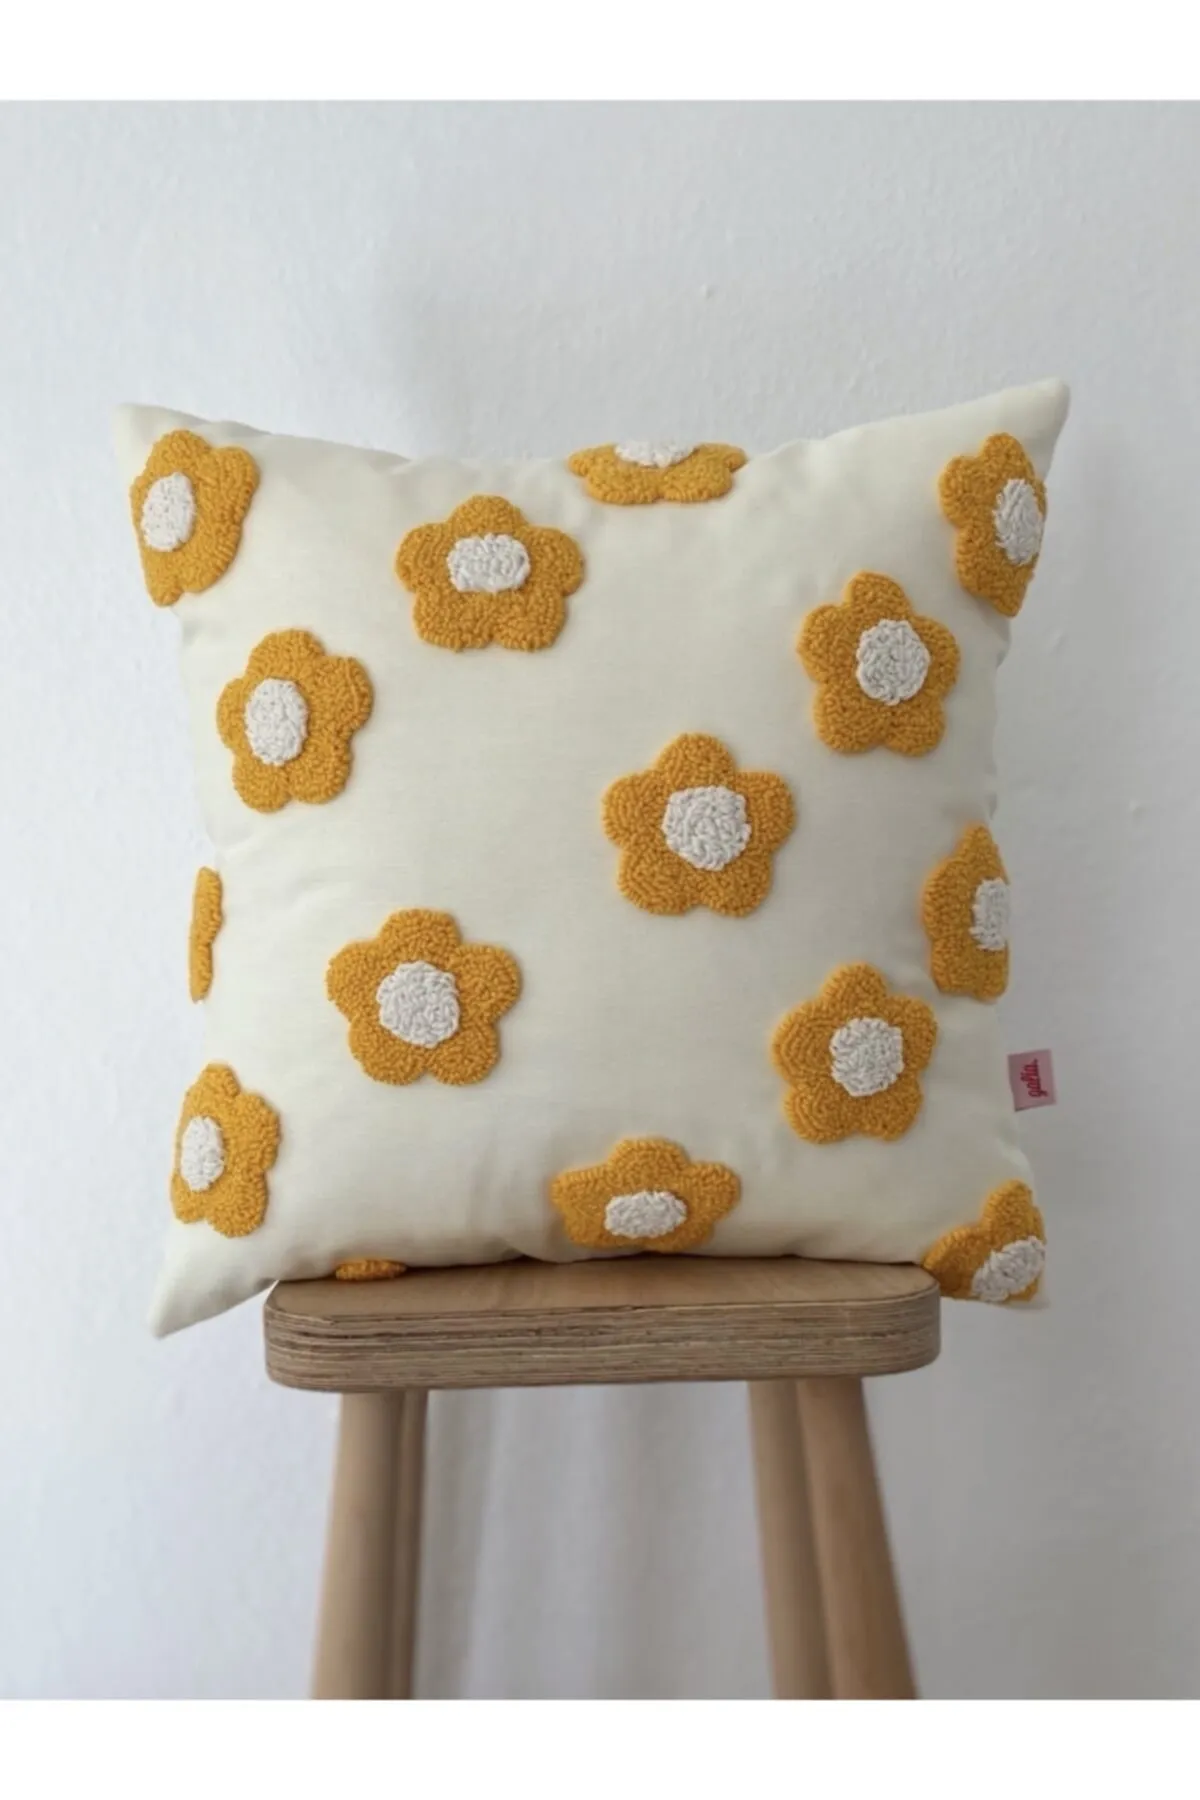 Daisy Flower Pattern Punch Cushion Pillow Cover